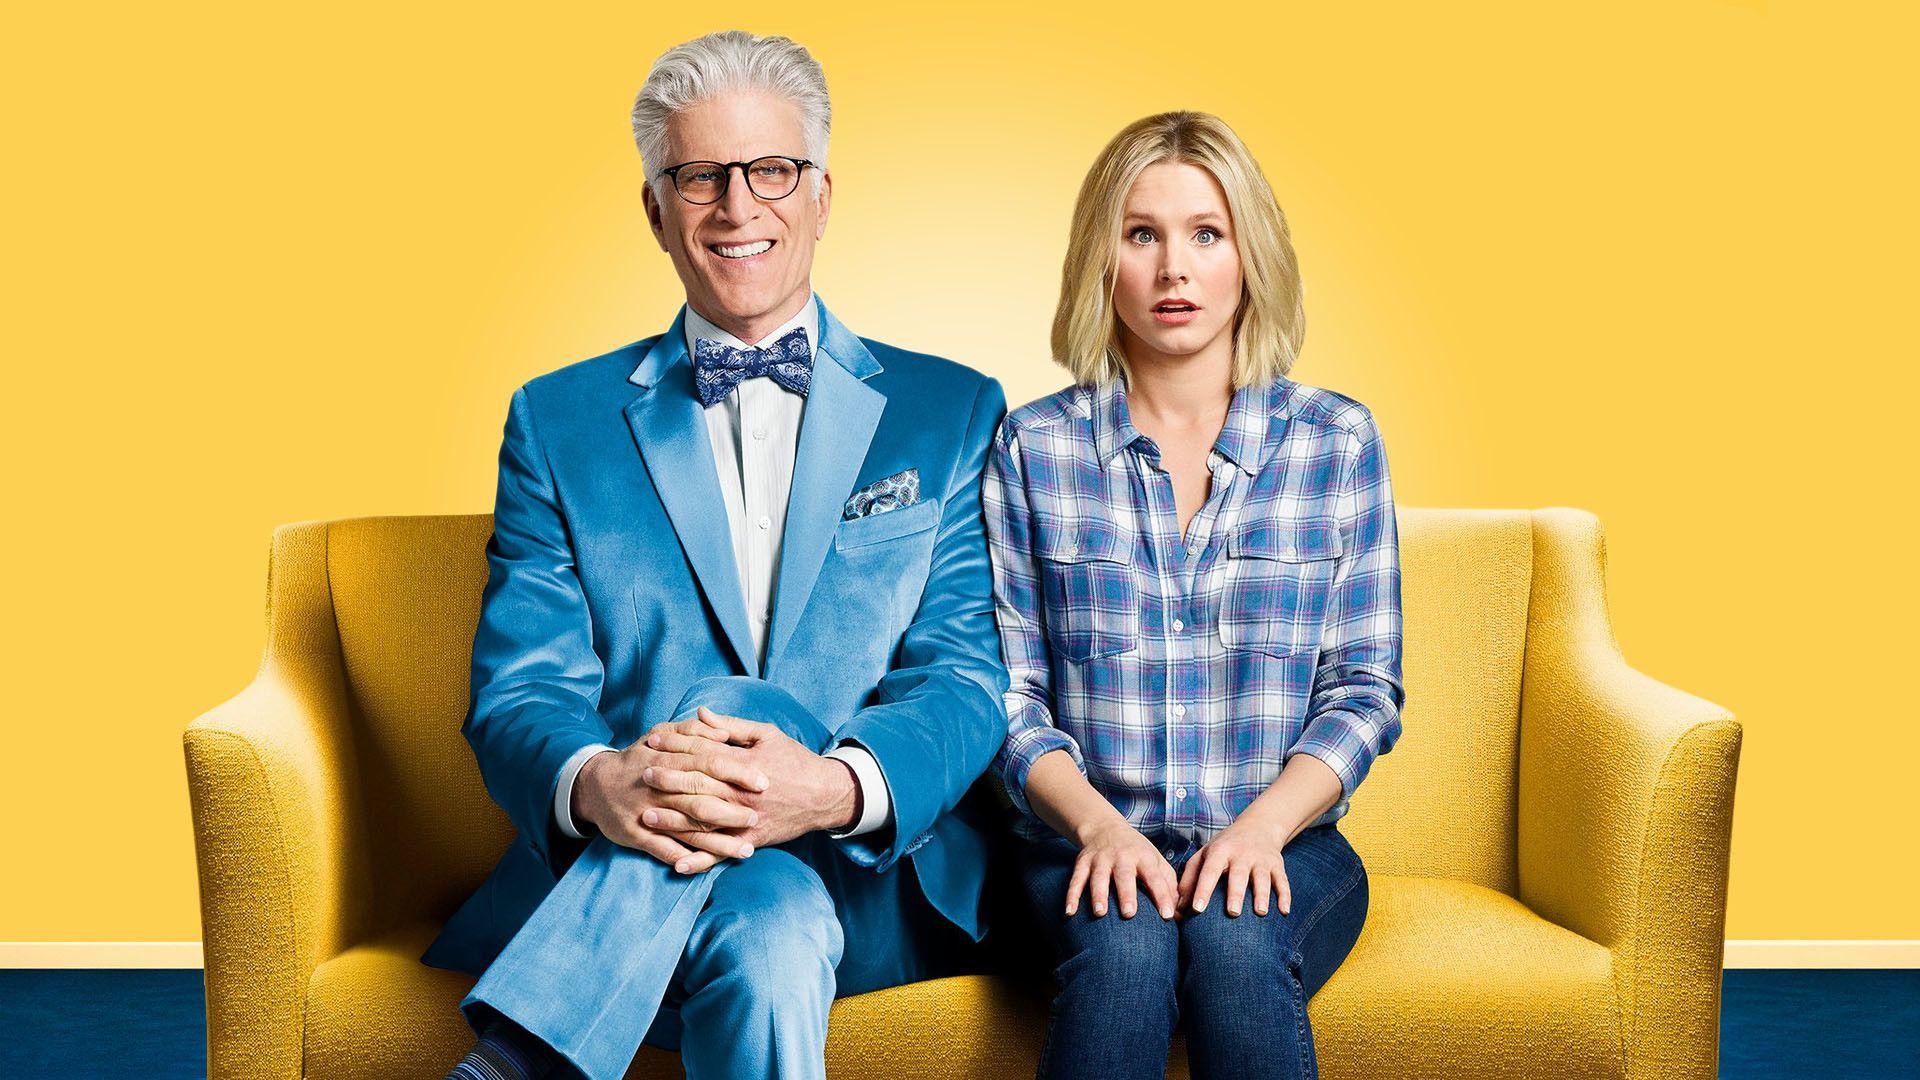 The Good Place Zoom Background